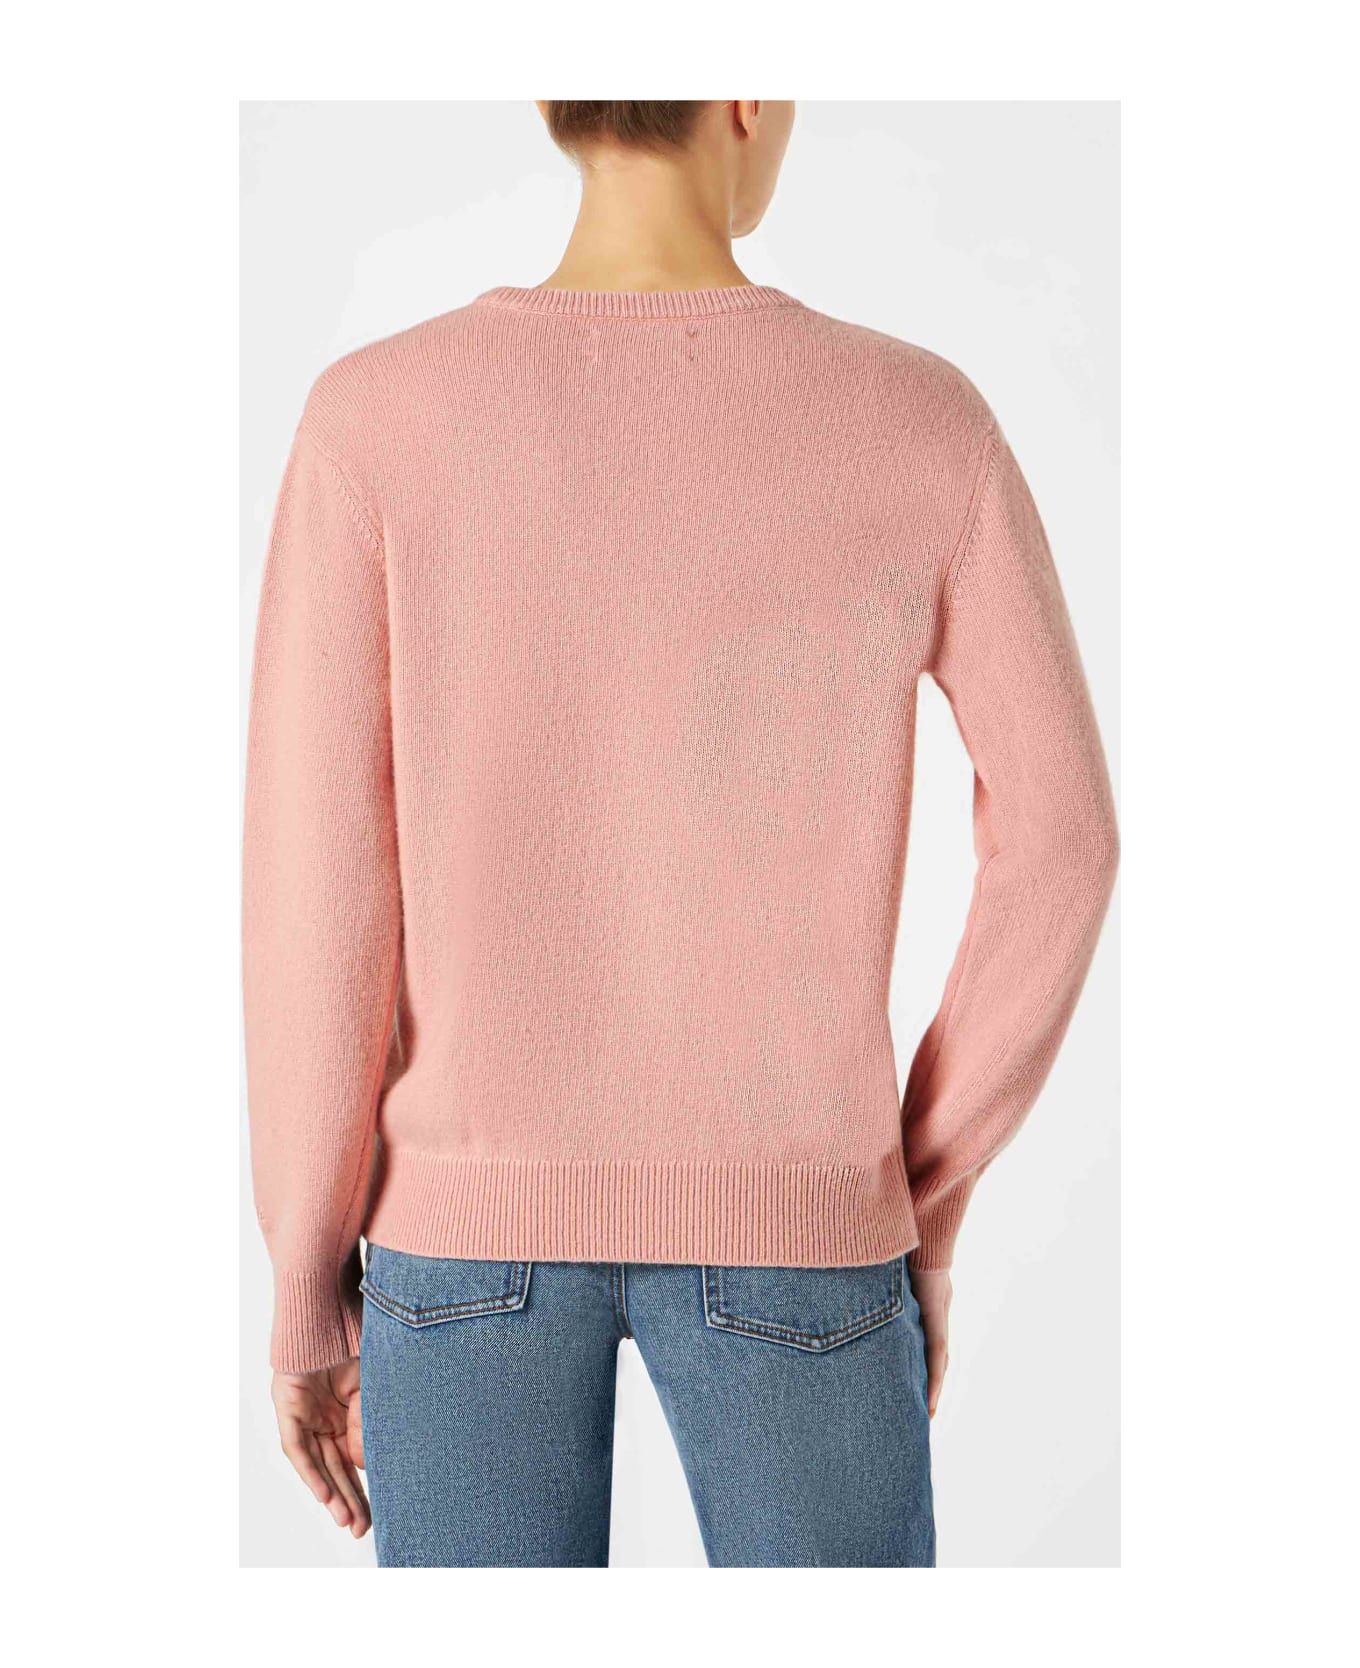 MC2 Saint Barth Woman Sweater With Where Is My Rosé? Embroidery - PINK